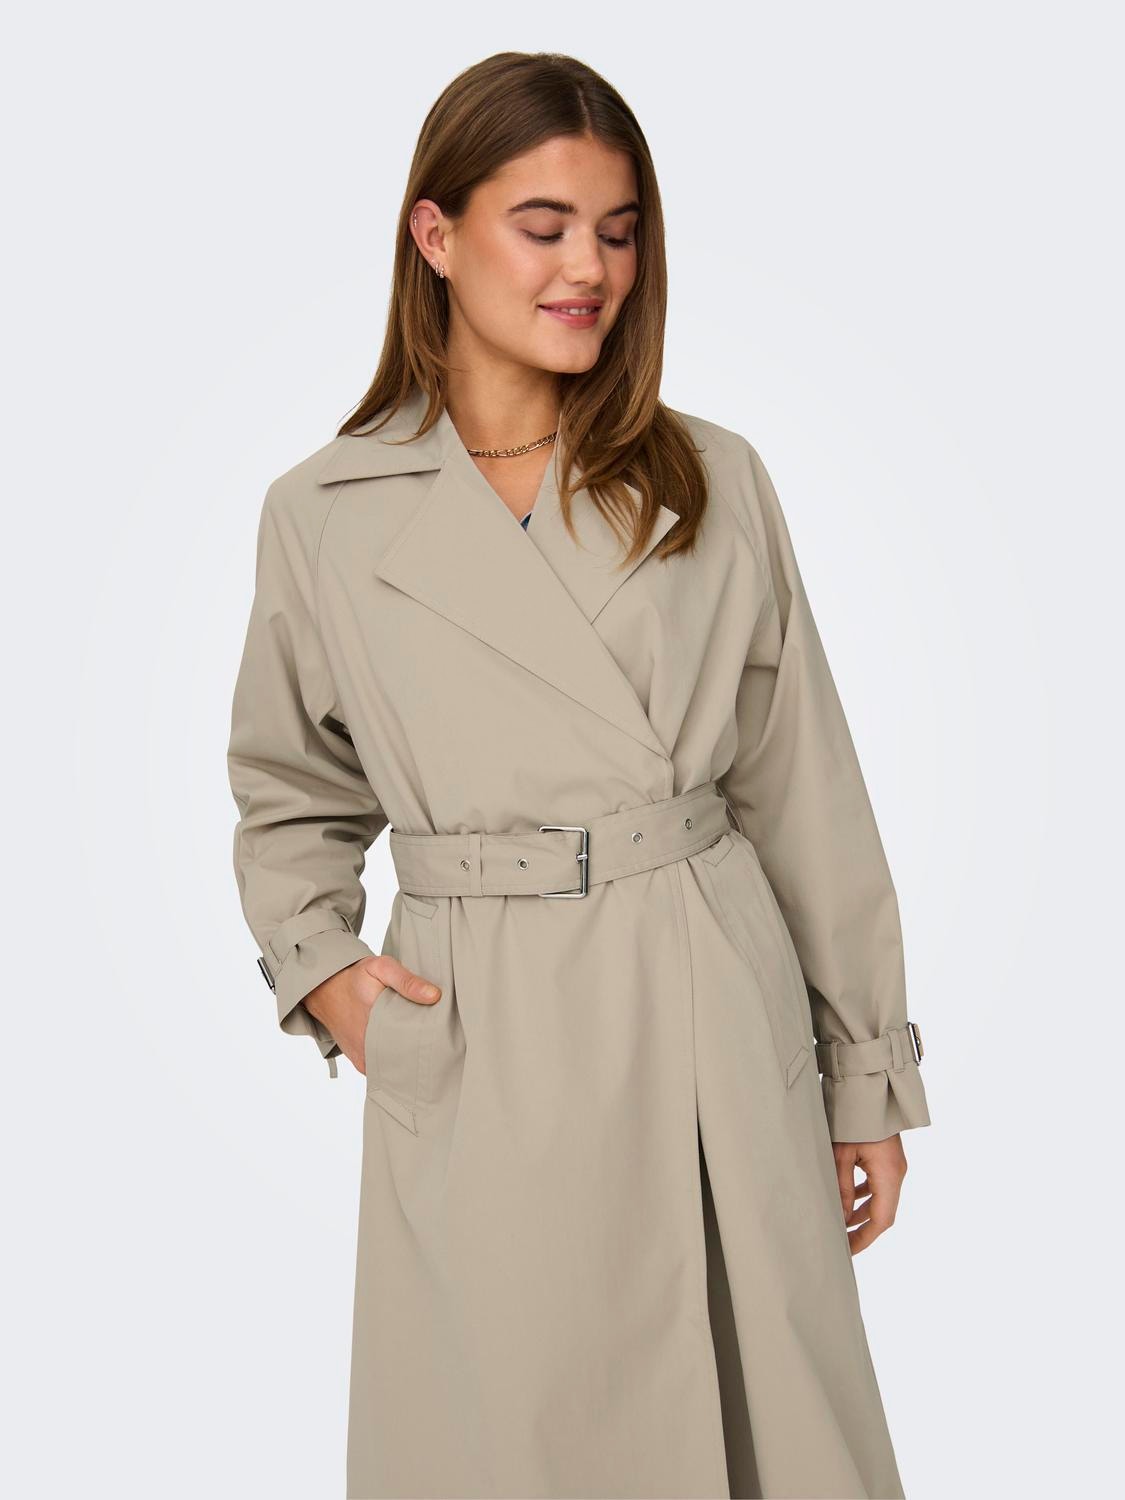 ONLY Lang trenchcoat -White Pepper - 15308860